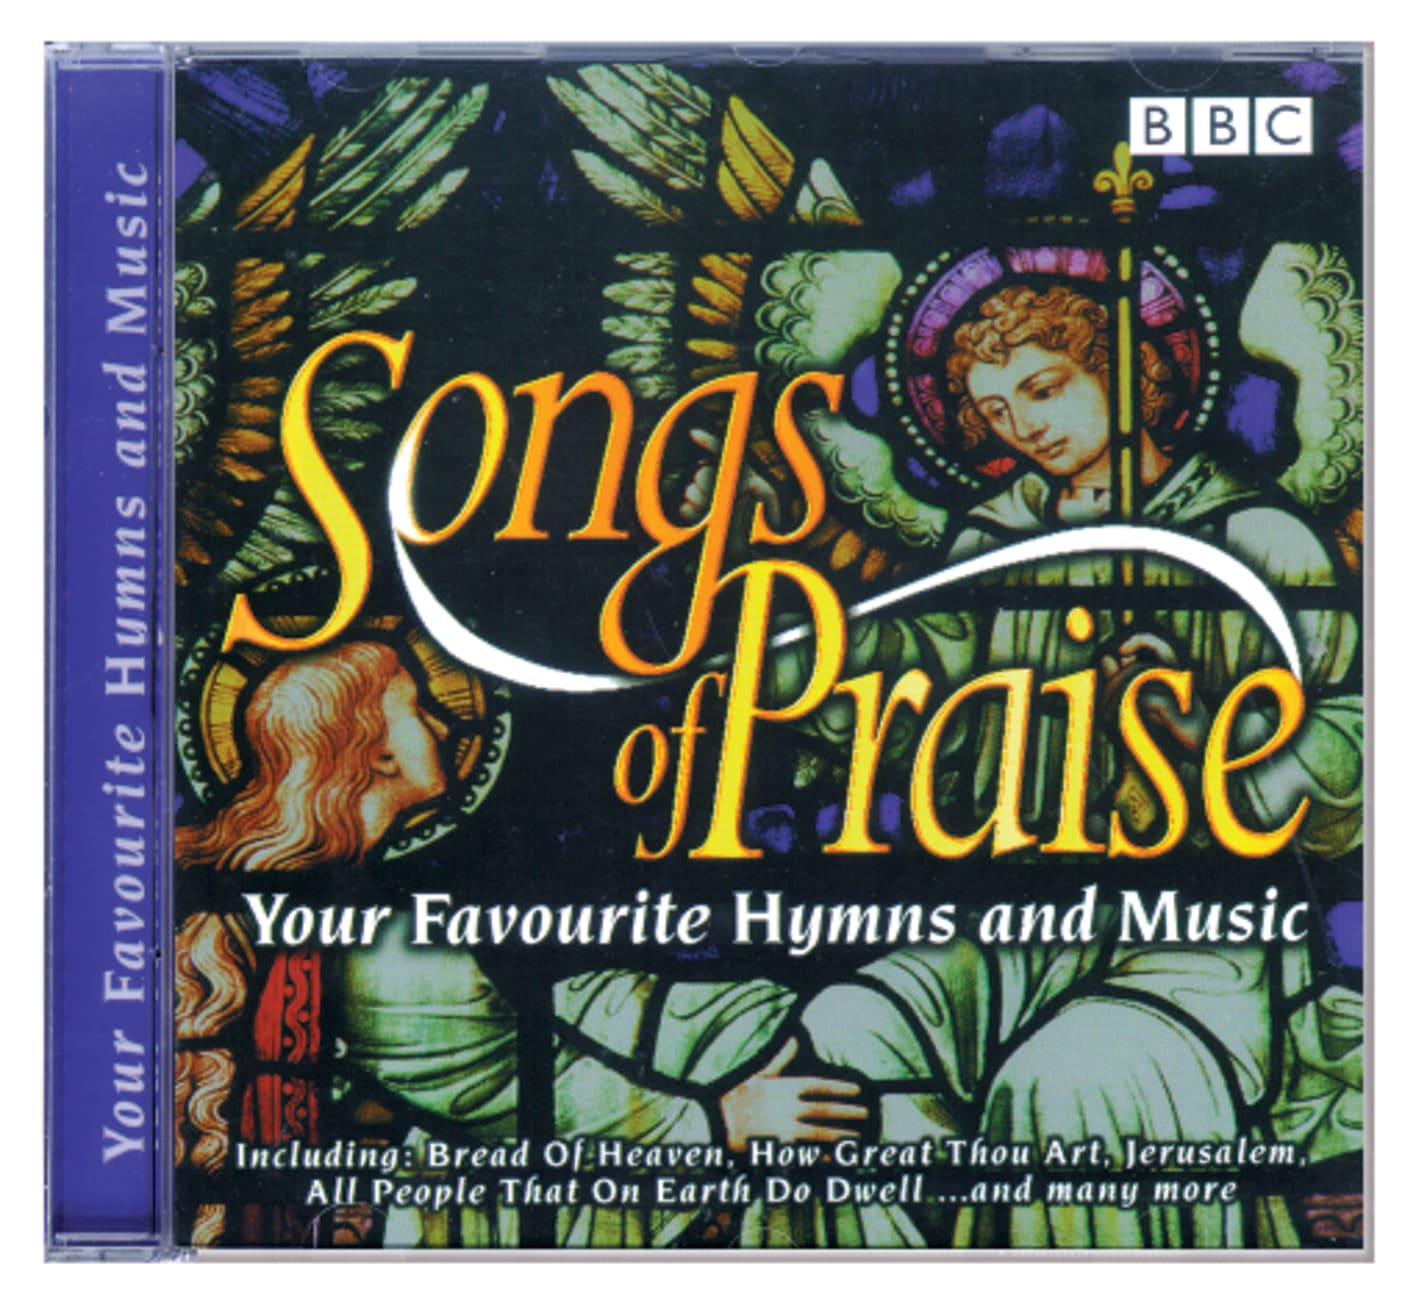 Bbc Songs of Praise: Your Favourite Hymns and Music CD